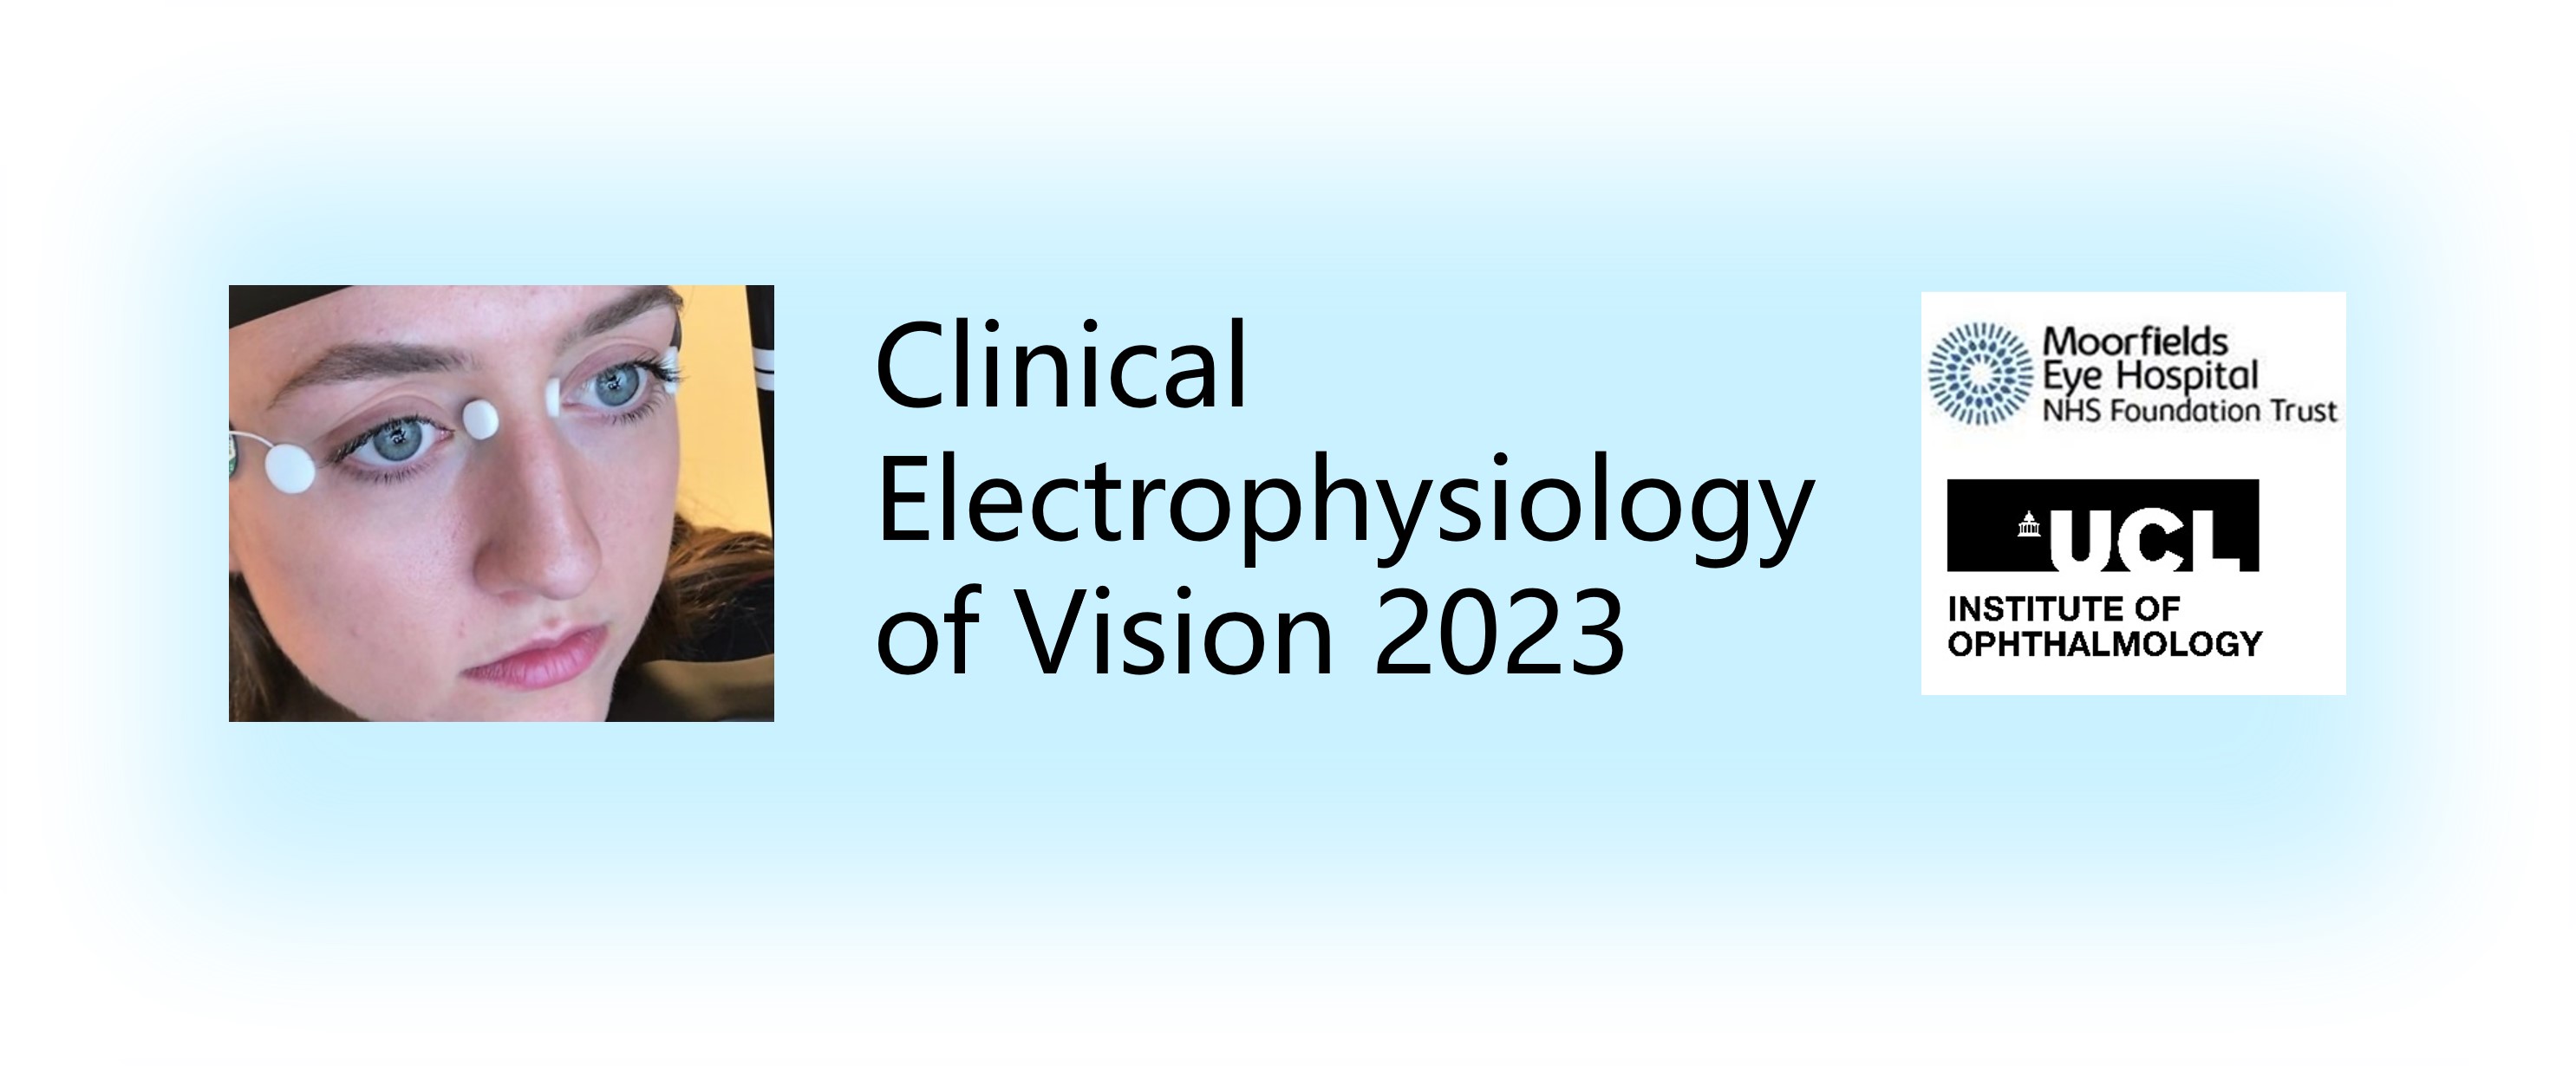 Clinical electrophysiology of vision